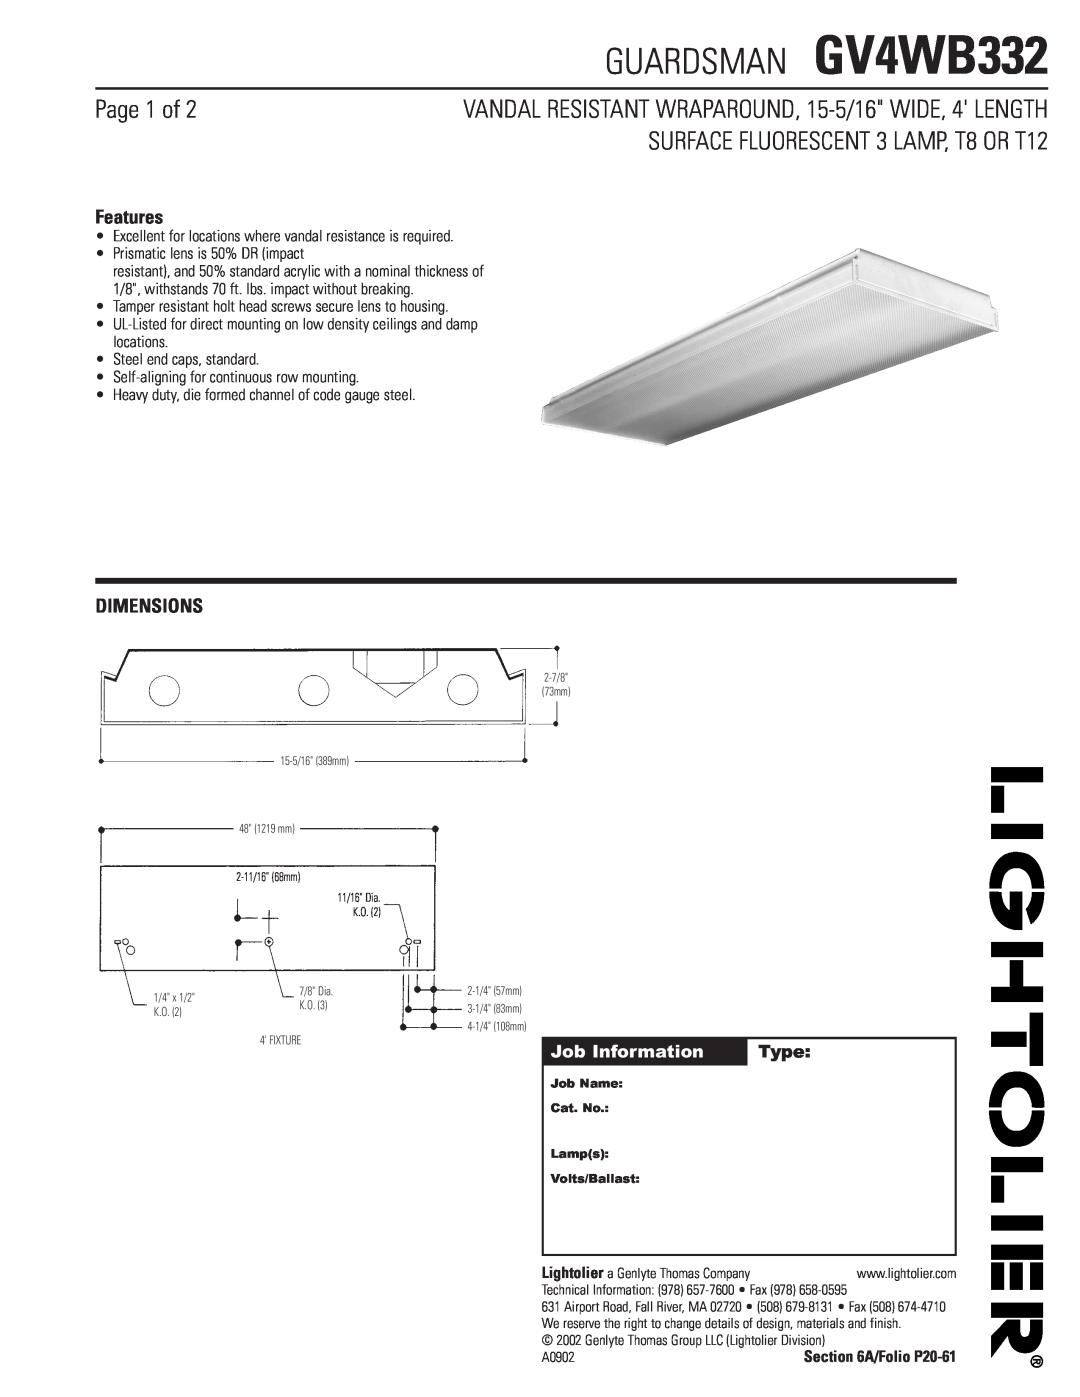 Lightolier dimensions Features, Dimensions, Job Information, Type, GUARDSMAN GV4WB332, Page 1 of 